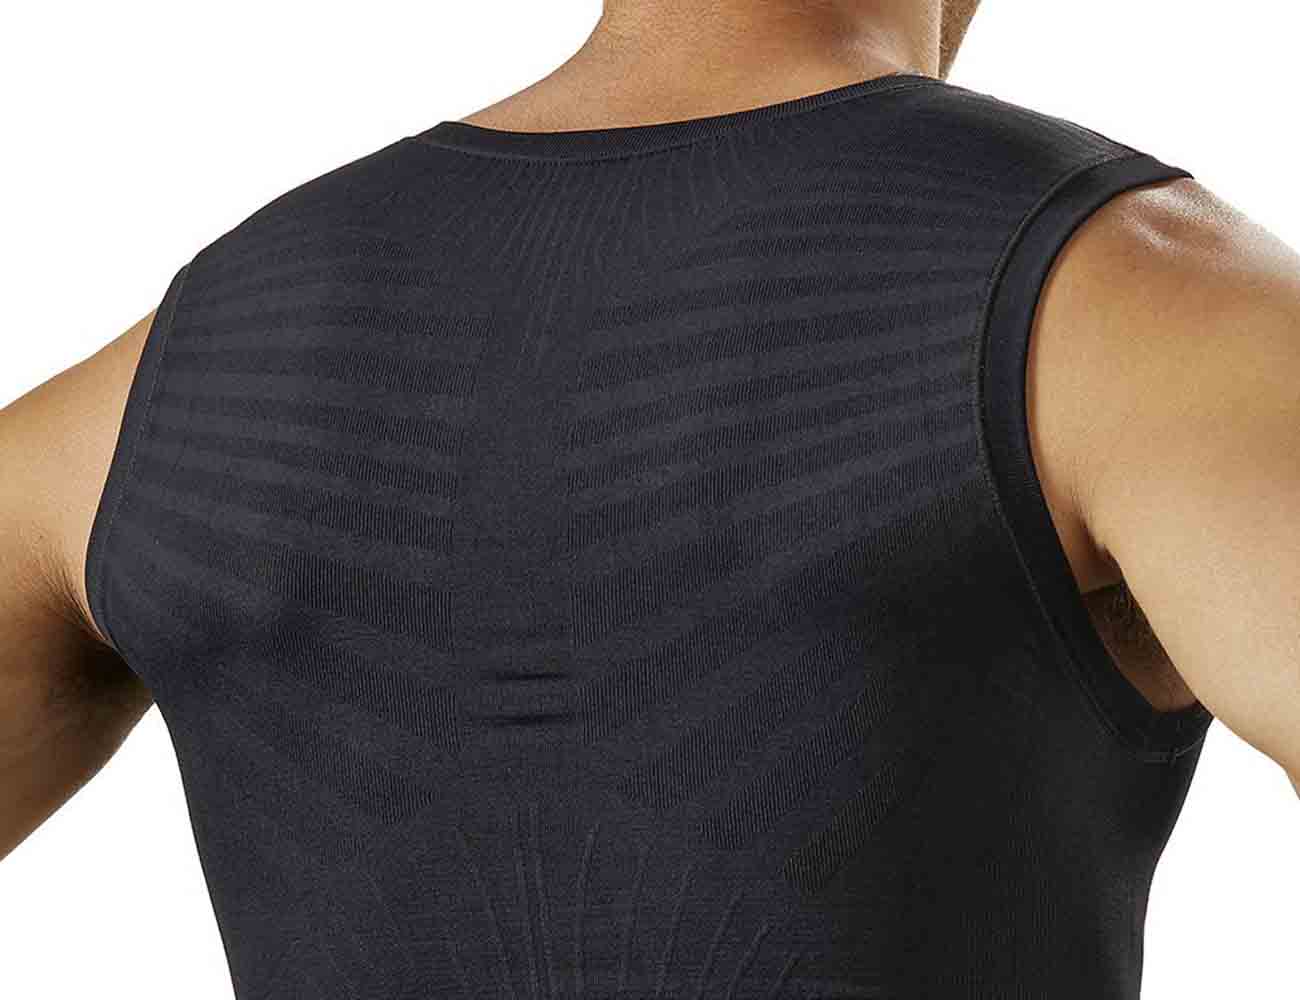 Sensoria Fitness Shirt with Heart Rate Monitor